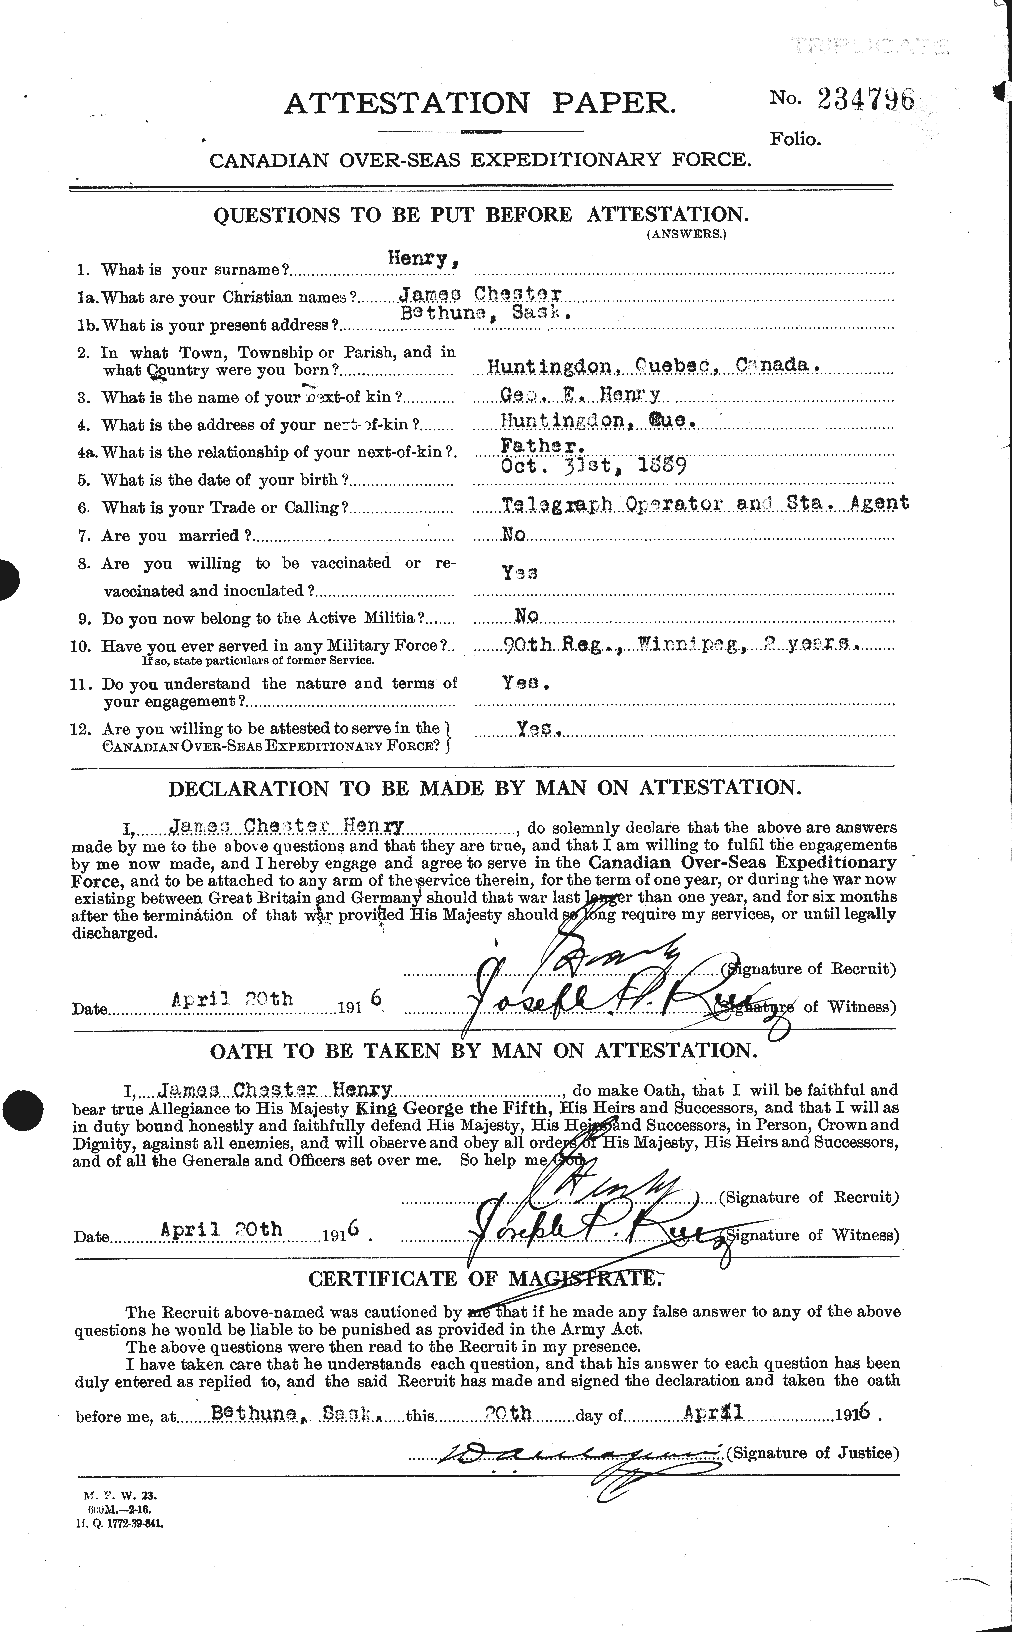 Personnel Records of the First World War - CEF 387594a